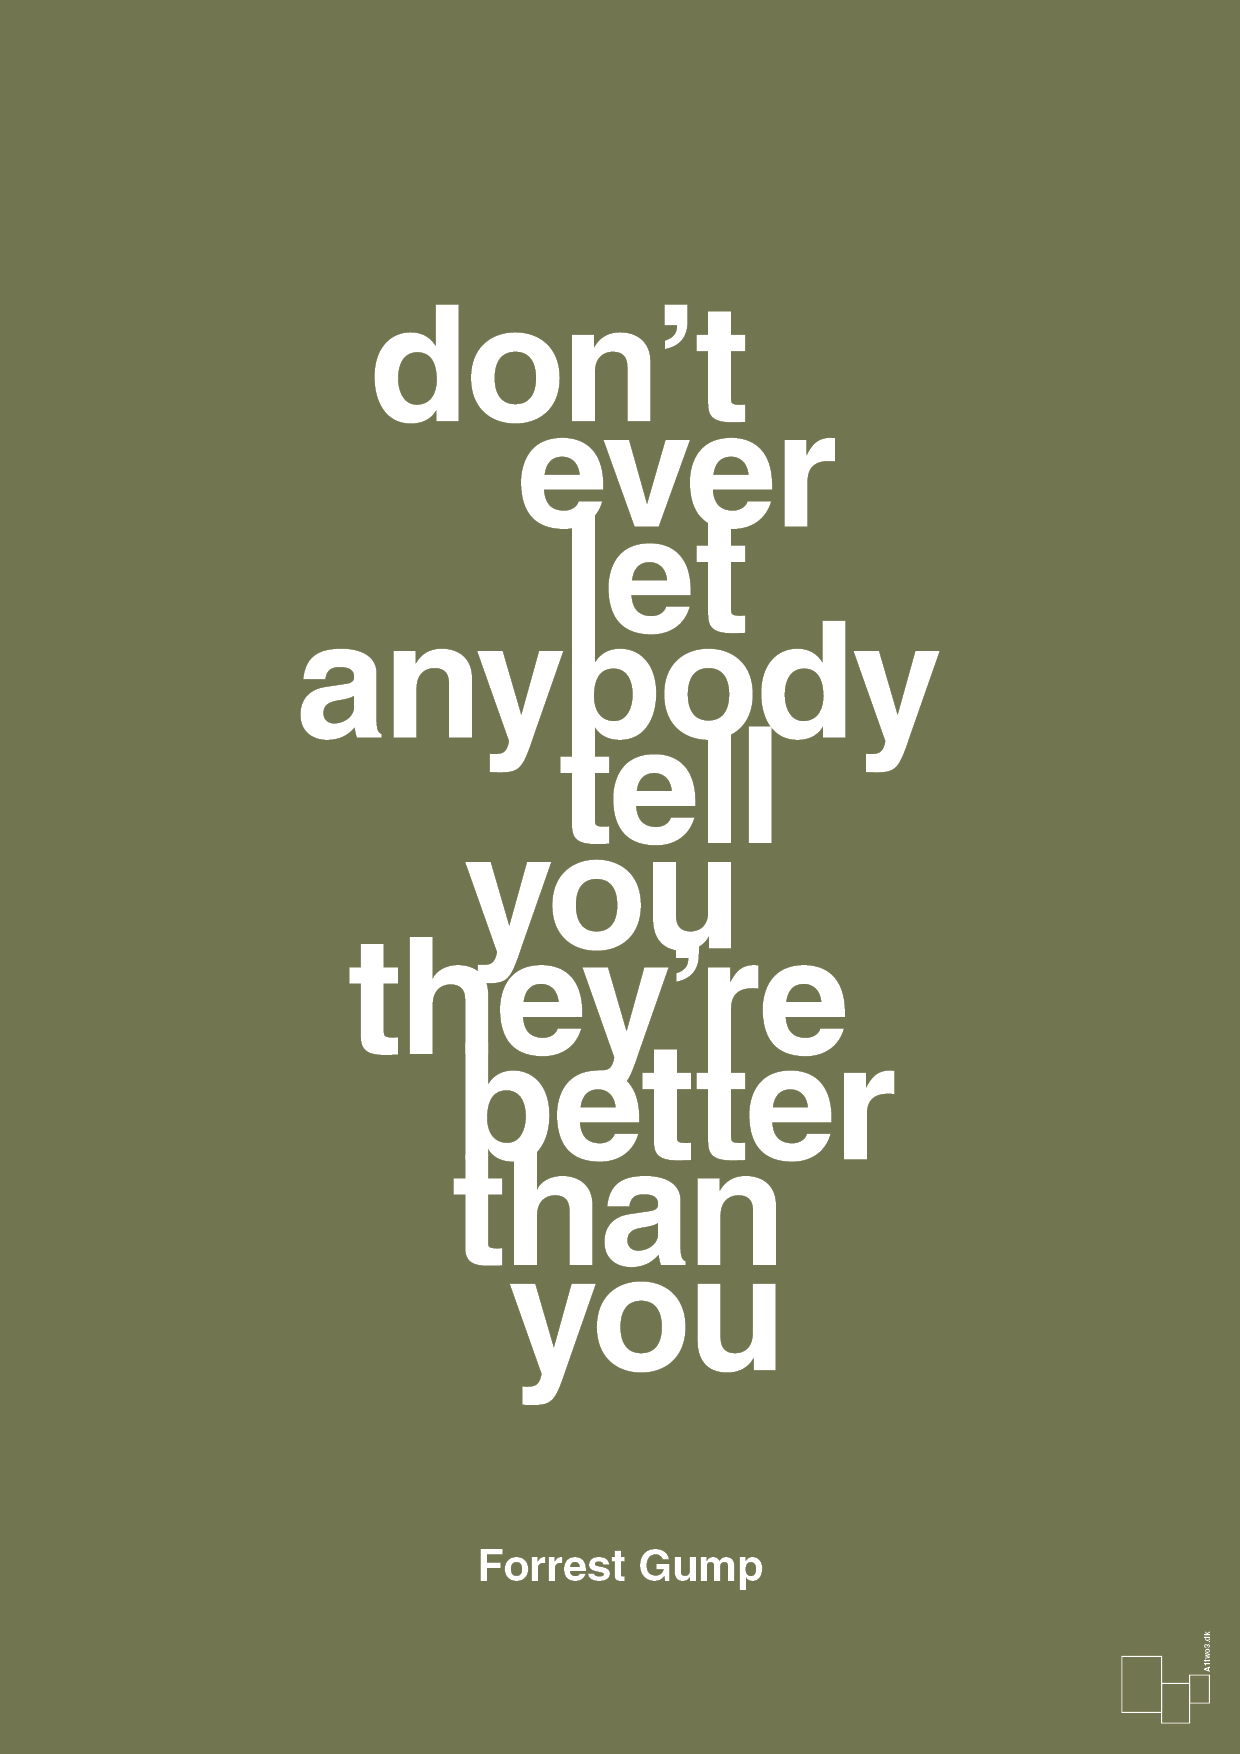 don’t ever let anybody tell you they’re better than you - Plakat med Citater i Secret Meadow